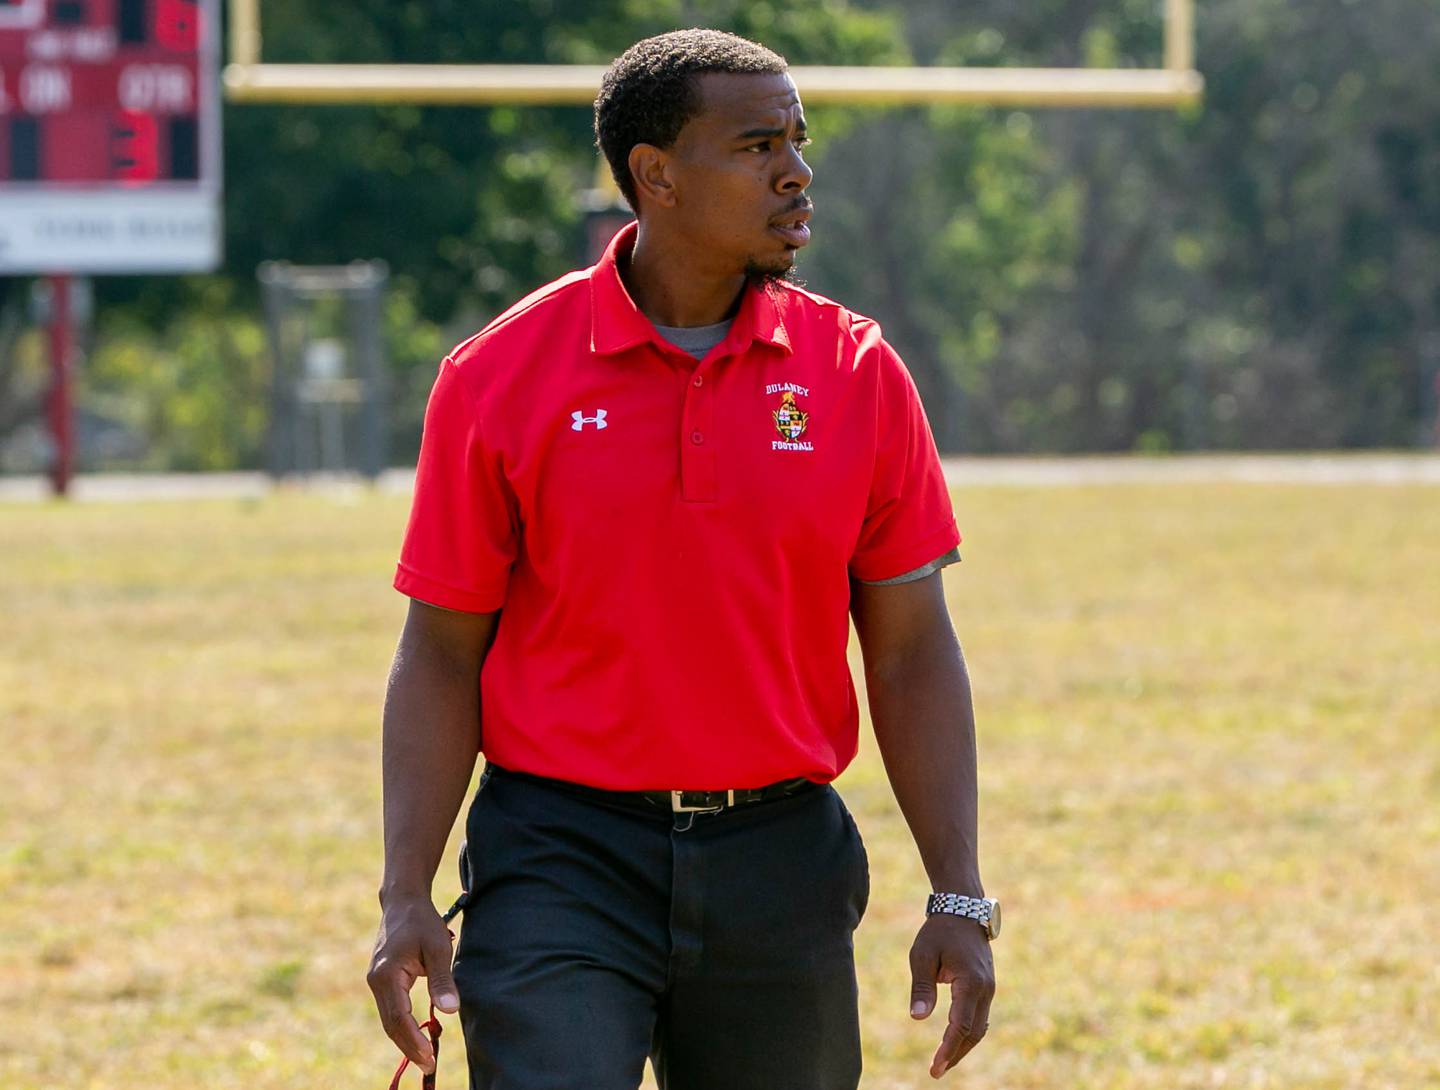 Daron Reid, who was Dulaney football coach for 10 seasons, died last weekend from pancreatic cancer. He guided the Lions to their first postseason victory last fall.